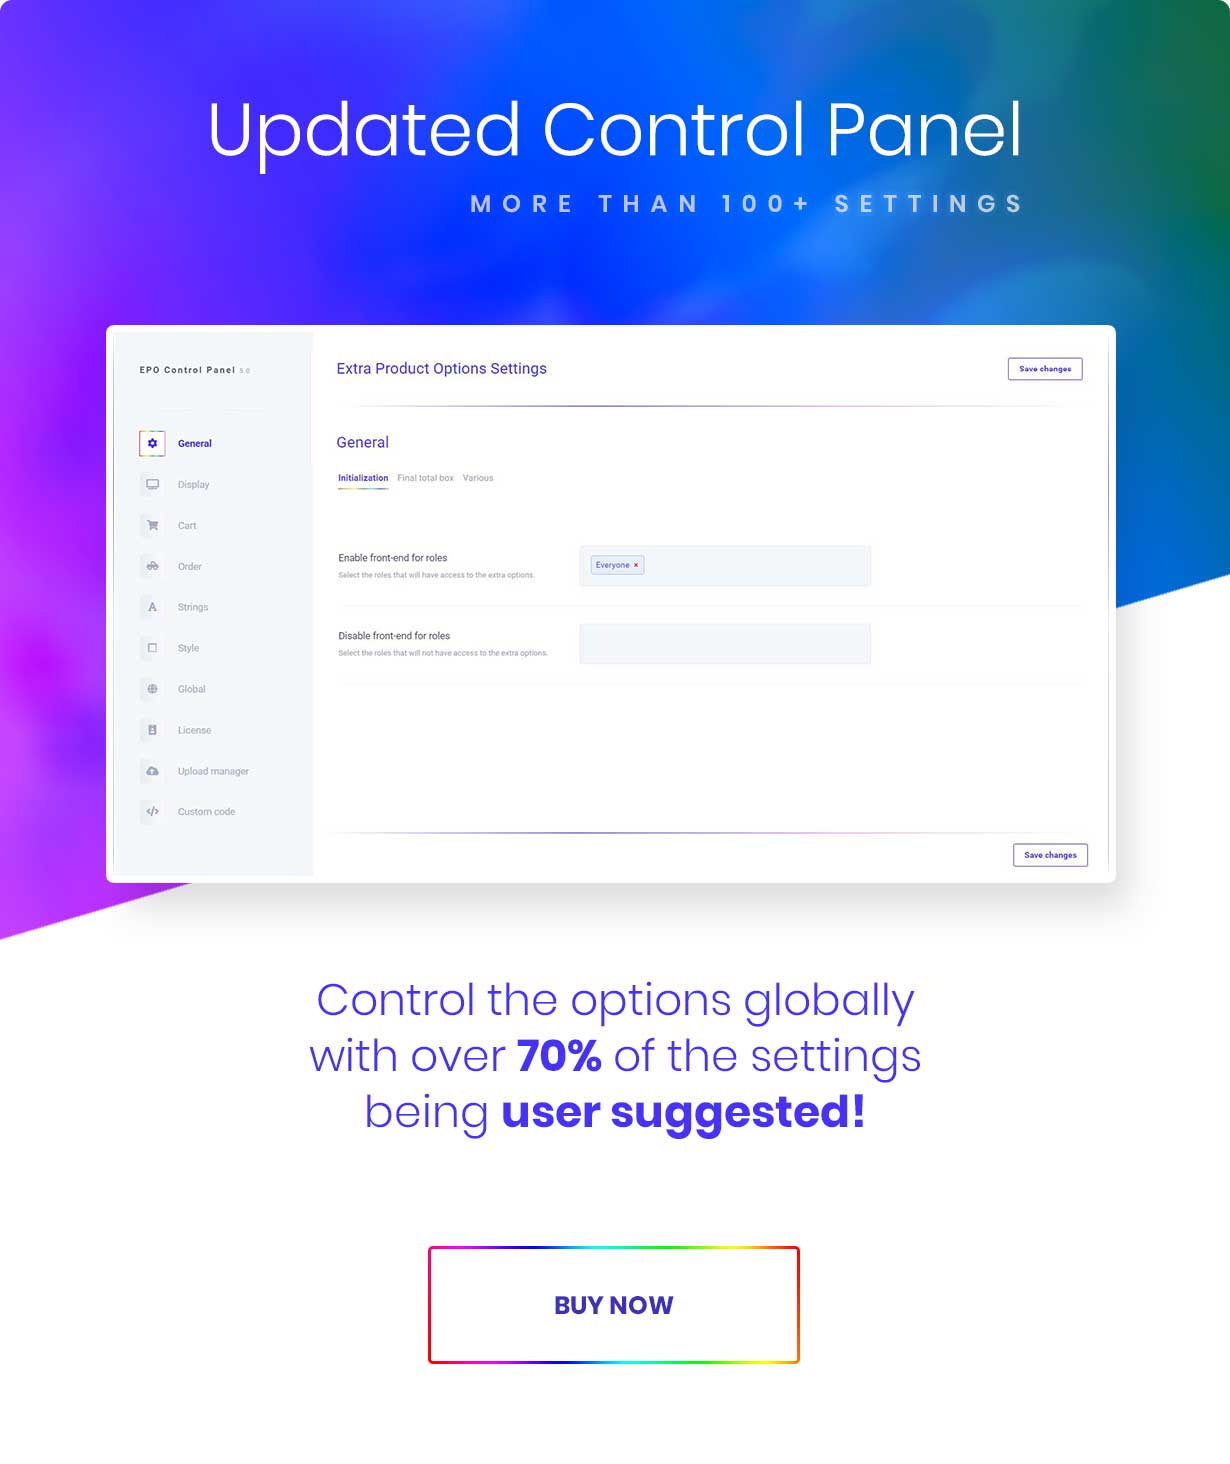 UPDATED CONTROL PANEL